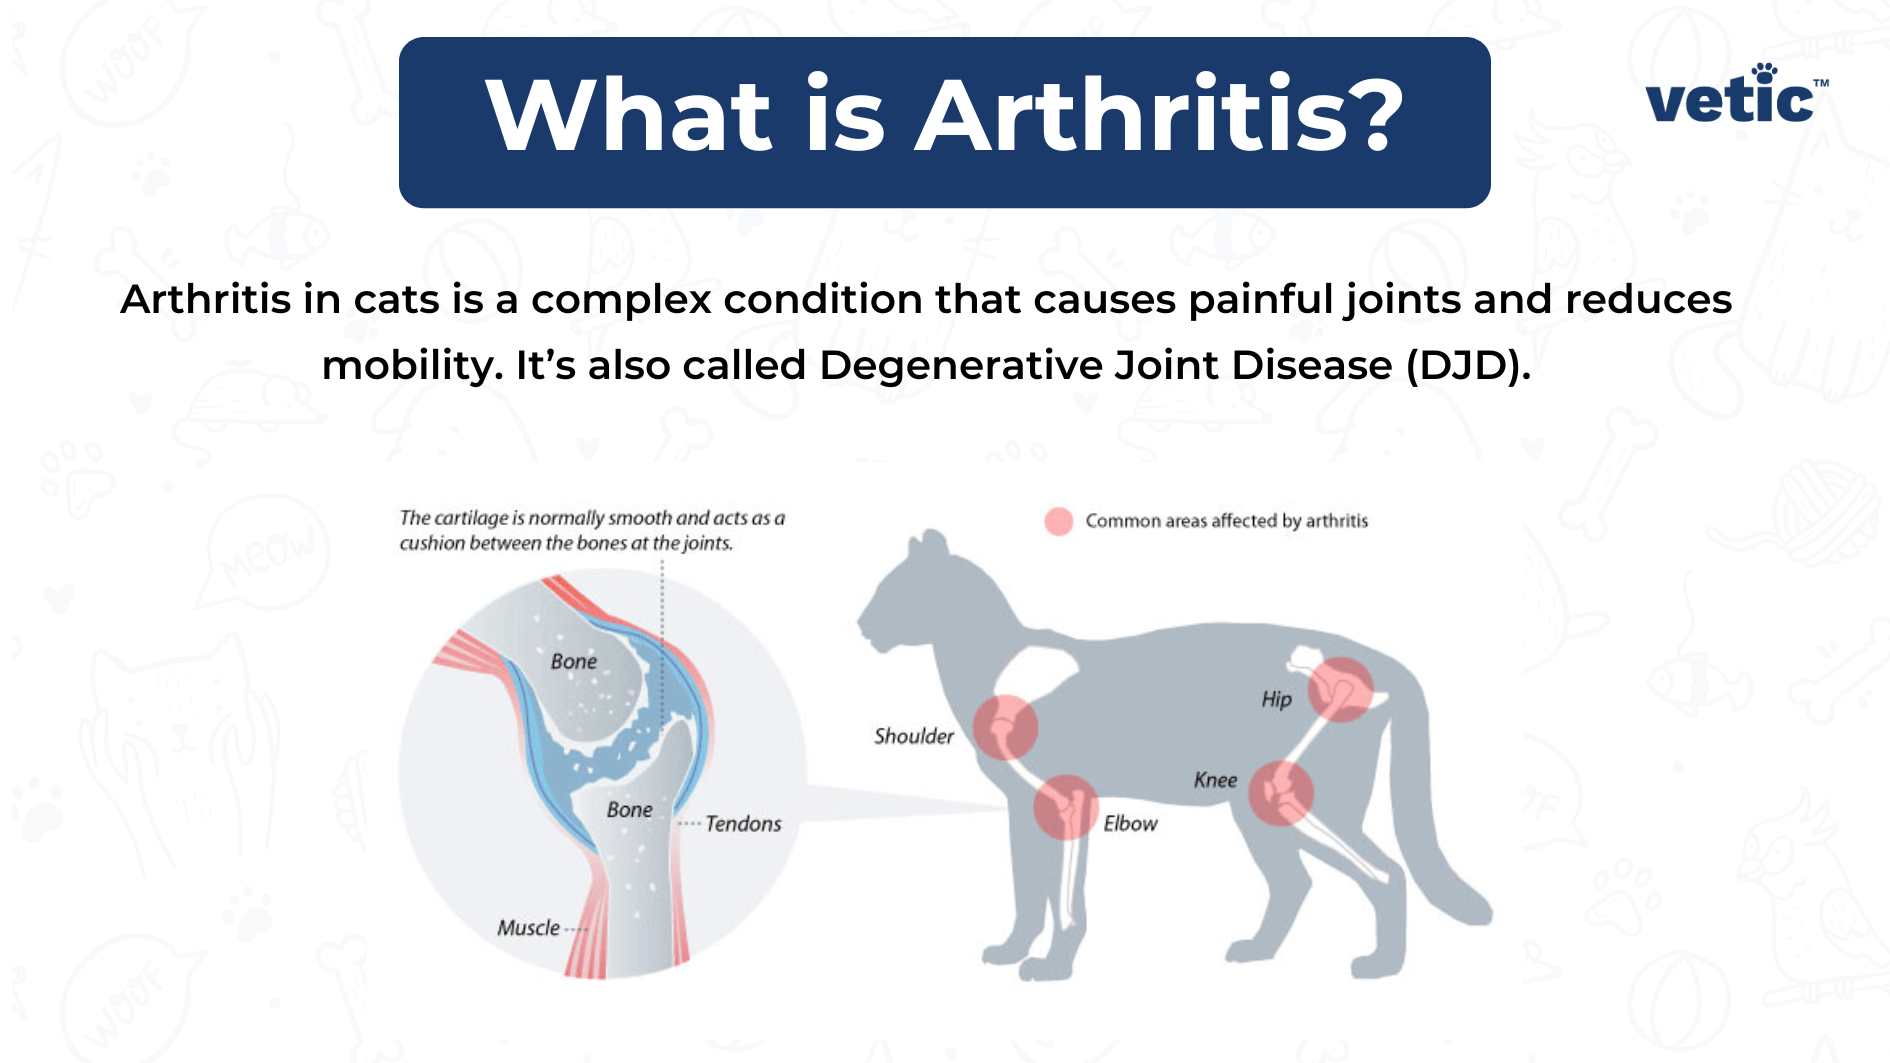 An informative illustration explaining arthritis in cats, including a detailed diagram of a joint and an outline of a cat highlighting common areas affected by arthritis. The illustration is titled “What is Arthritis?” and is created by veti™. It describes arthritis in cats as a complex condition that causes painful joints and reduces mobility, also known as Degenerative Joint Disease (DJD). The left side of the image features a detailed diagram of a joint affected by arthritis, labeling the bone, tendons, and muscles, and noting that cartilage acts as a cushion between bones at the joints. On the right side, there’s an outline of a cat with red circles indicating common areas affected by arthritis, such as the shoulder, elbow, hip, and knee. The background is white with light blue patterns resembling molecular structures. Text Extracted via OCR: “What is Arthritis? Arthritis in cats is a complex condition that causes painful joints and reduces mobility. It’s also called Degenerative Joint Disease (DJD). The cartilage is normally smooth and acts as a cushion between the bones at the joints. Common areas affected by arthritis. vetic™